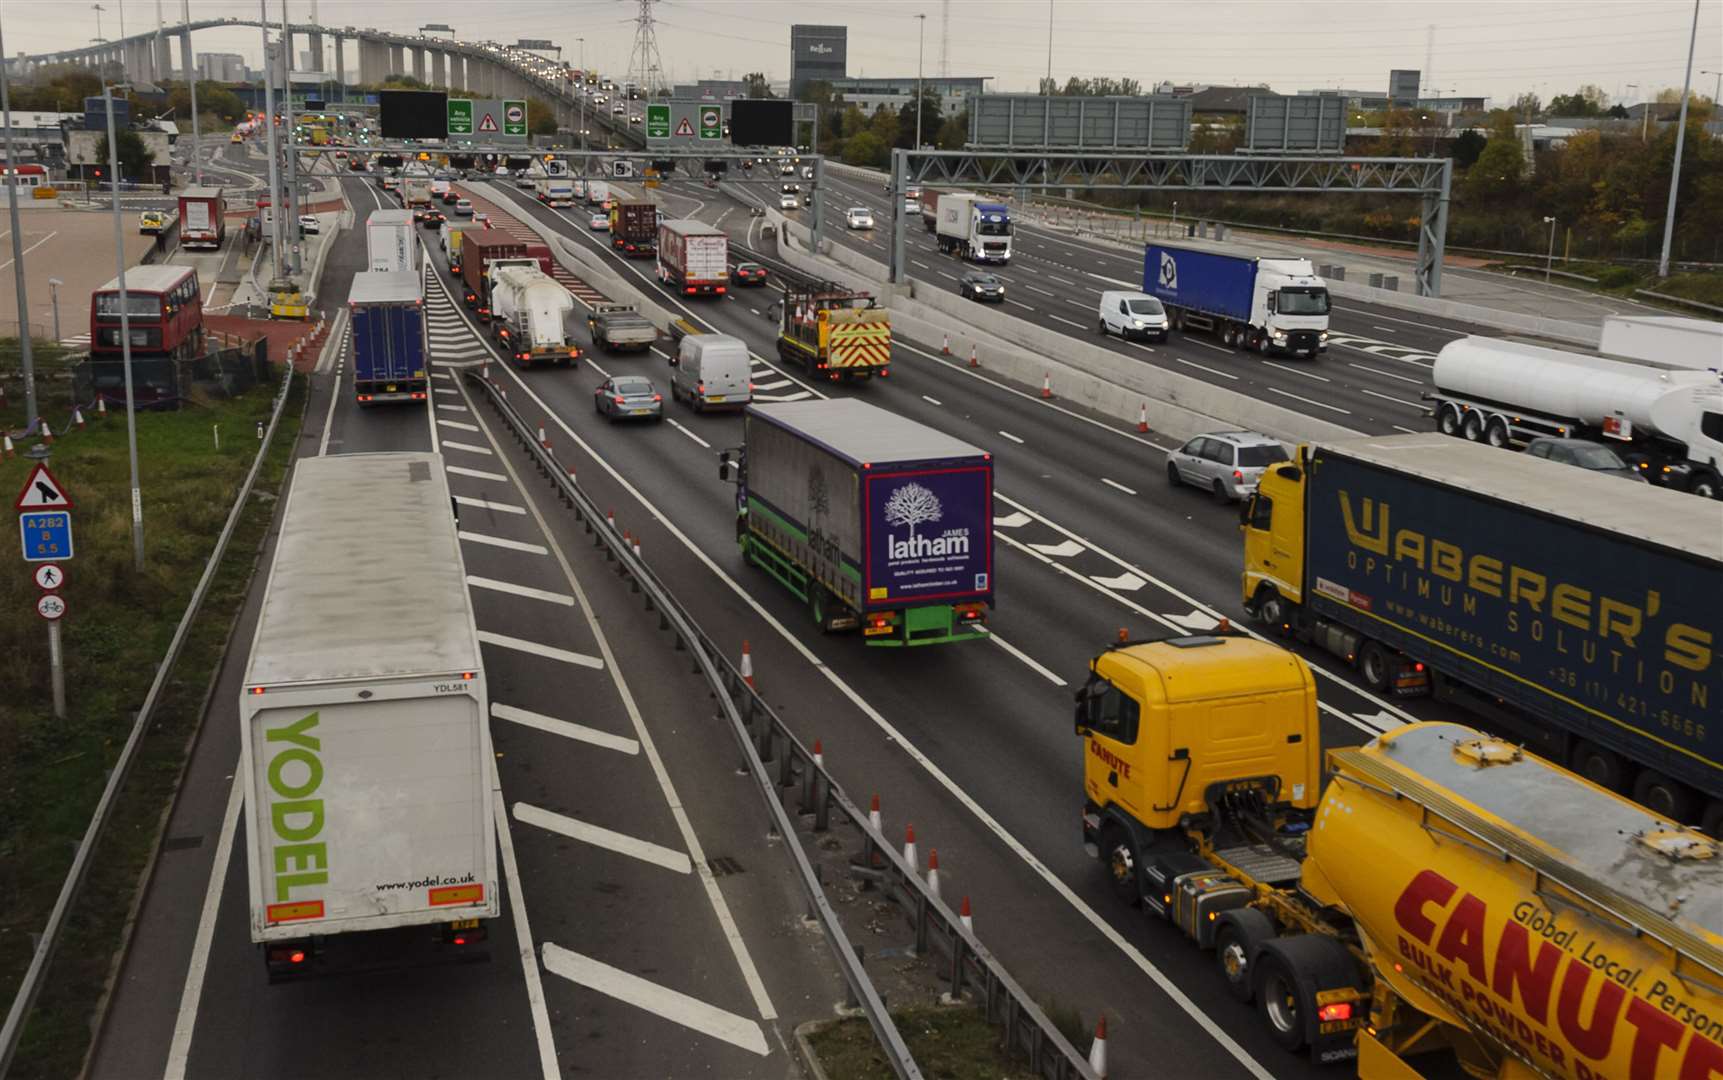 The approach to the Dartford Crossing suffers from heavy congestion